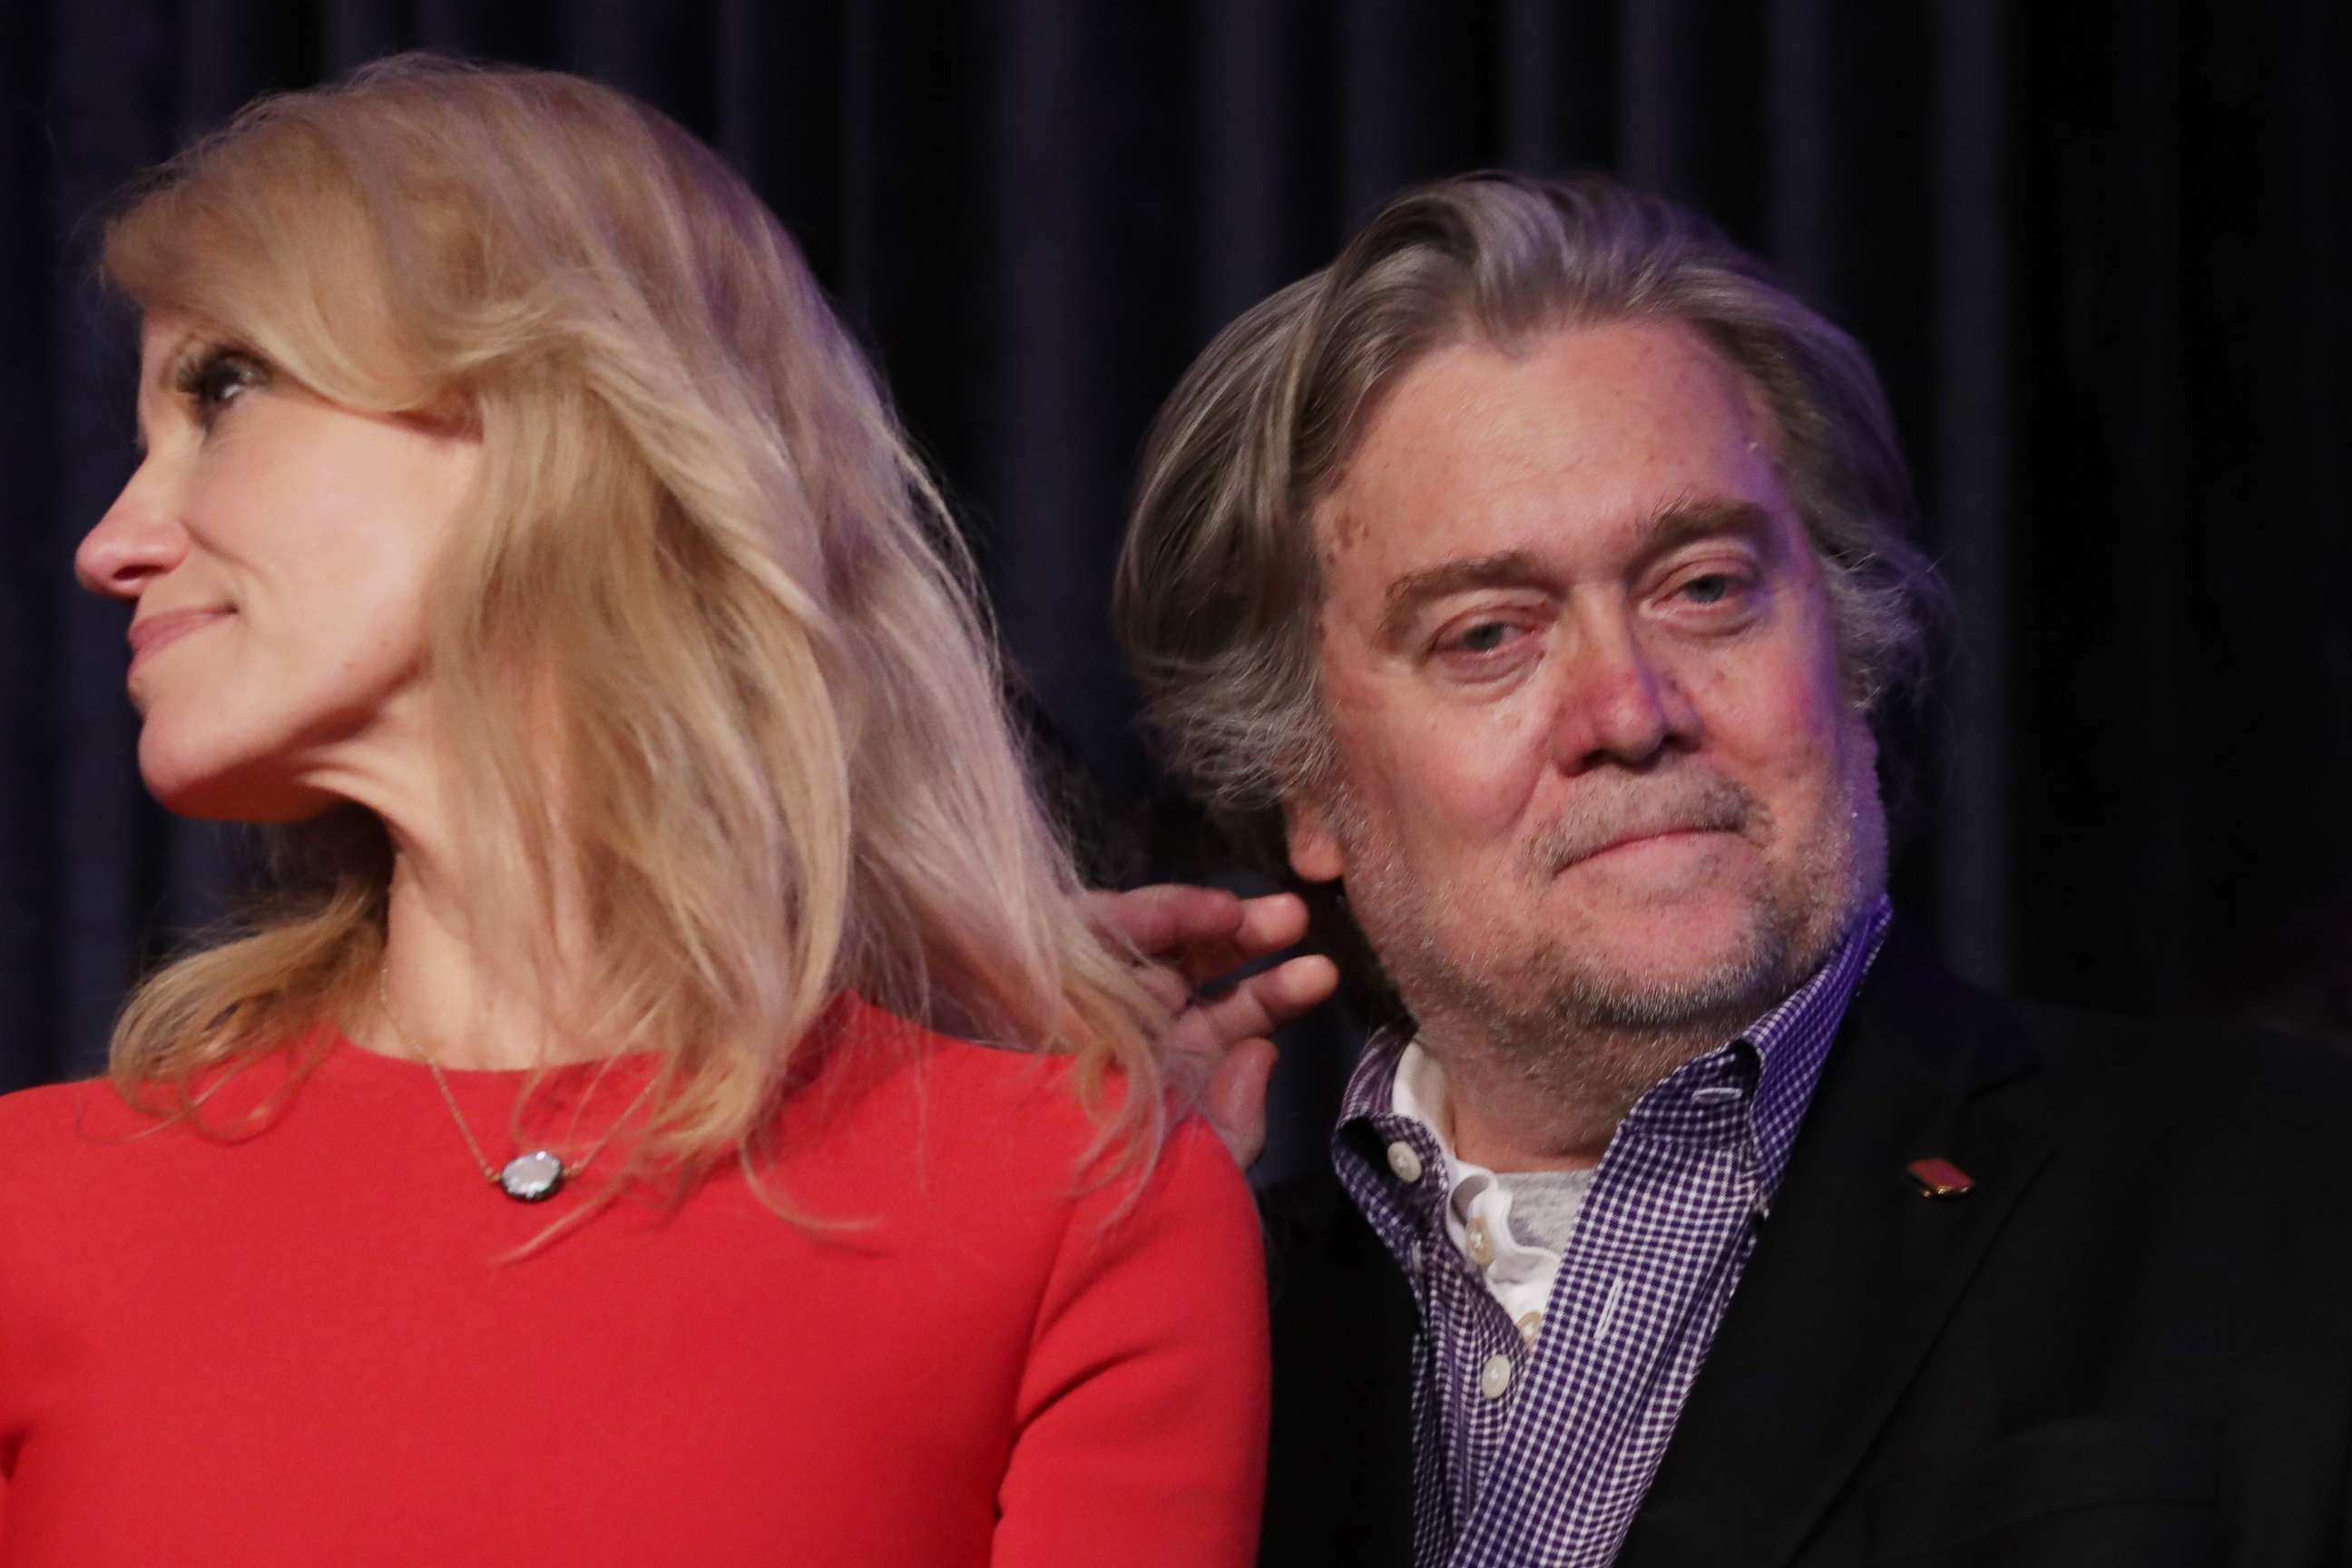 PHOTO: Republican president-elect Donald Trump's campaign manager, Kellyanne Conway, and Trump campaign CEO Stephen Bannon stand on stage during the election night event at the New York Hilton Midtown, Nov. 9, 2016.